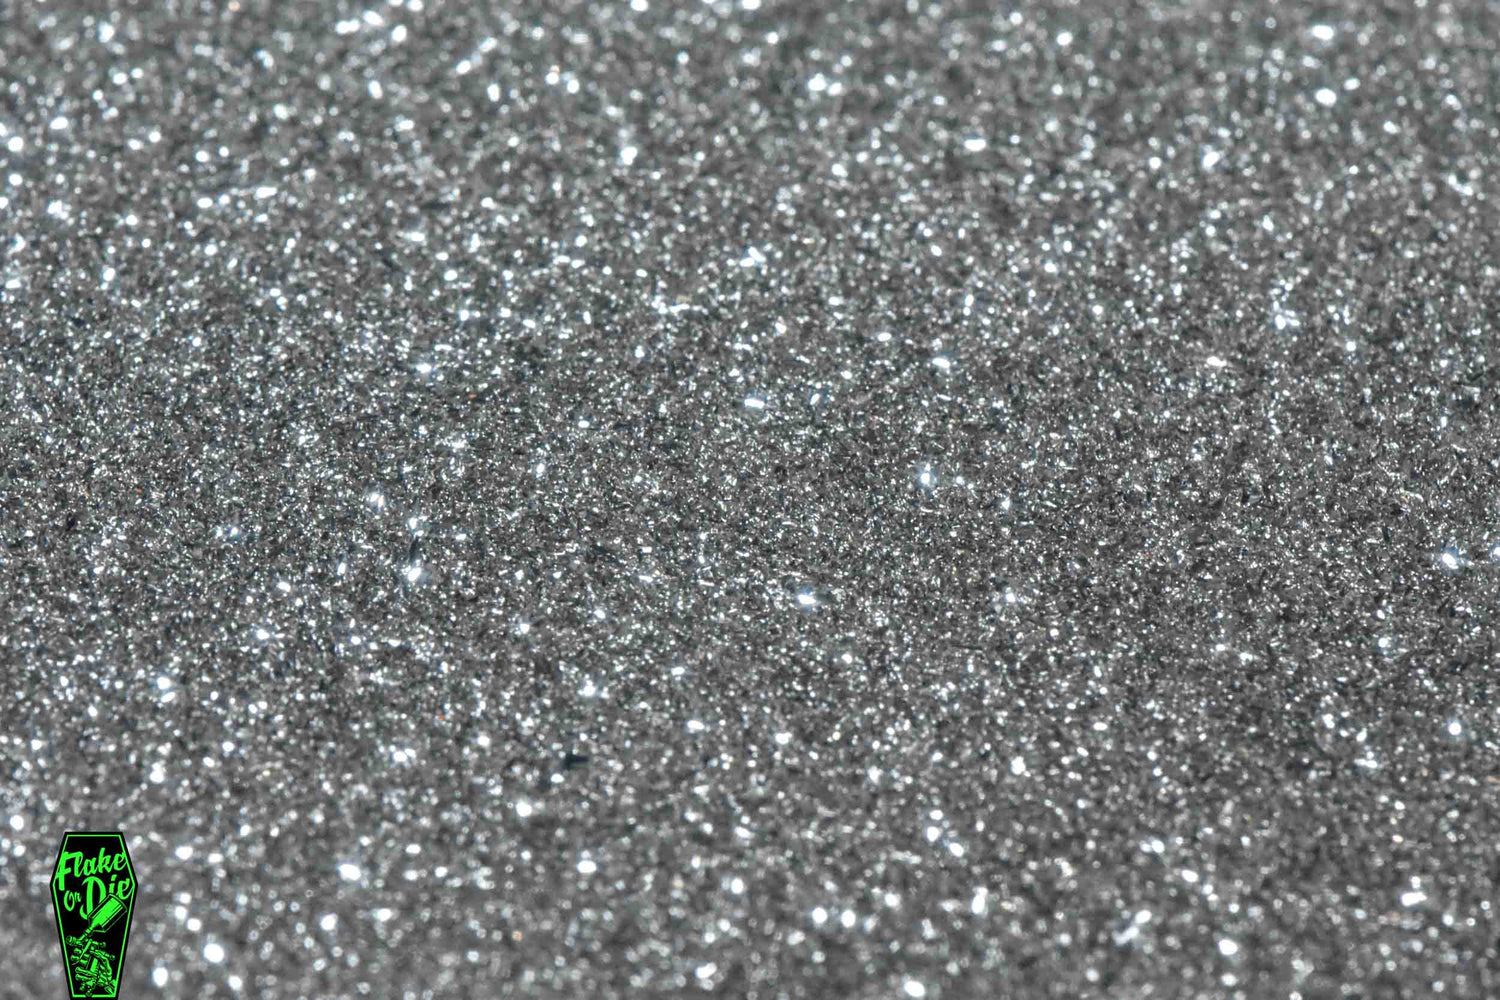 Macro photography product shot of silver glass particles in a small pile.